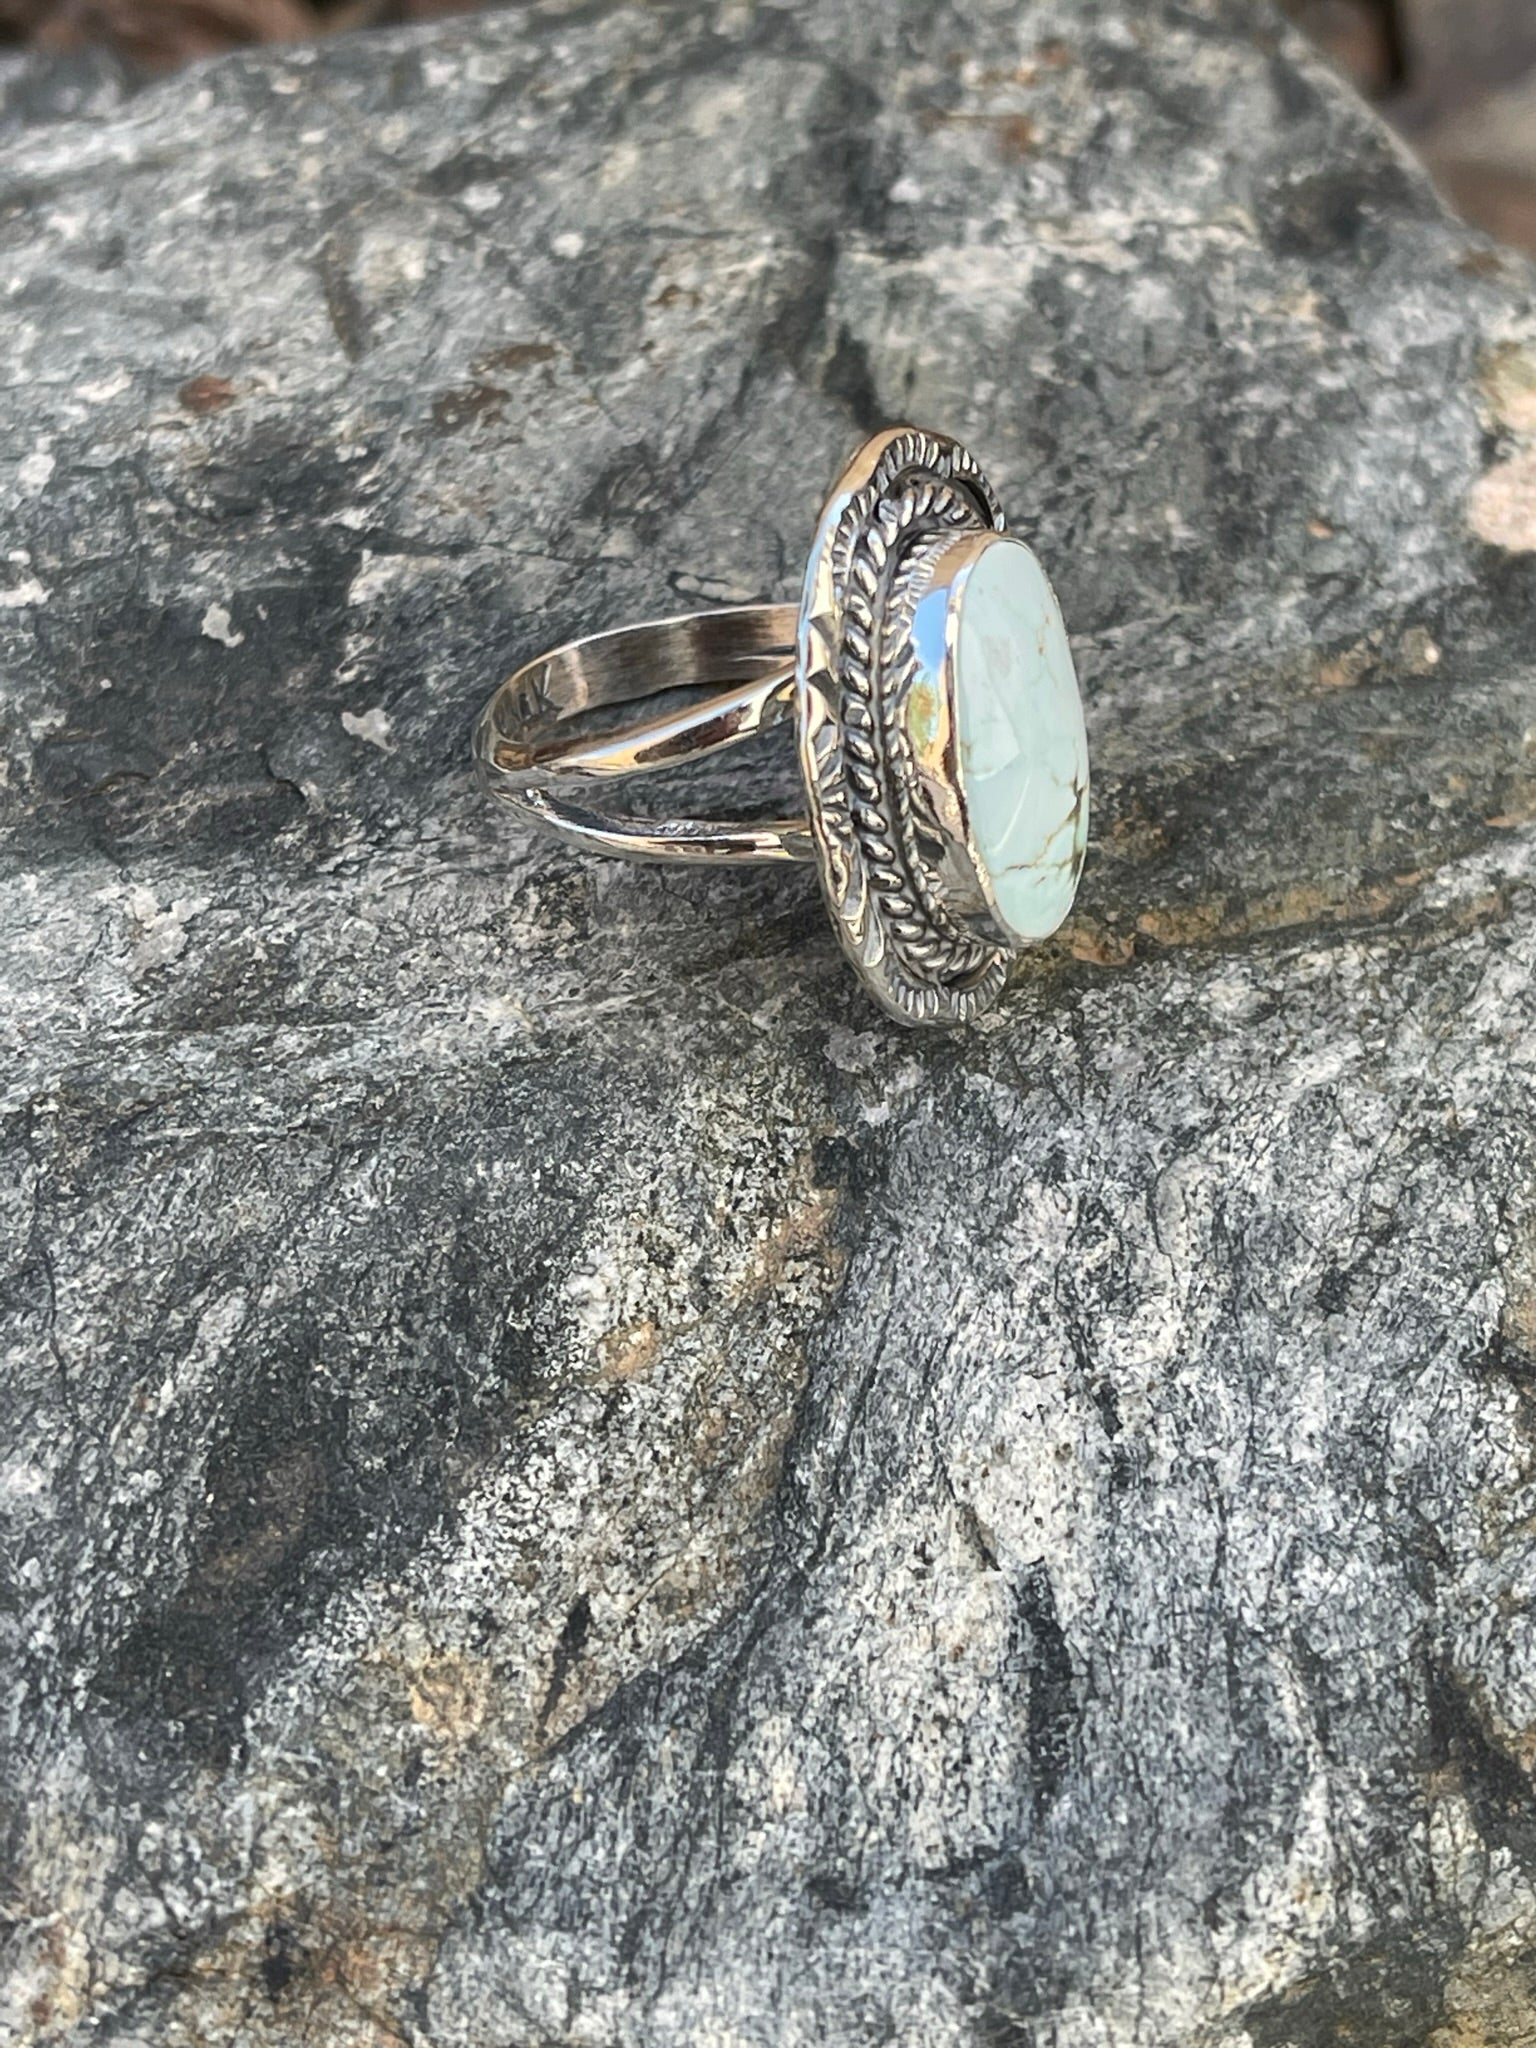 Handmade Solid Sterling Dry Creek Turquoise Ring with Stamp Trim- Size 8